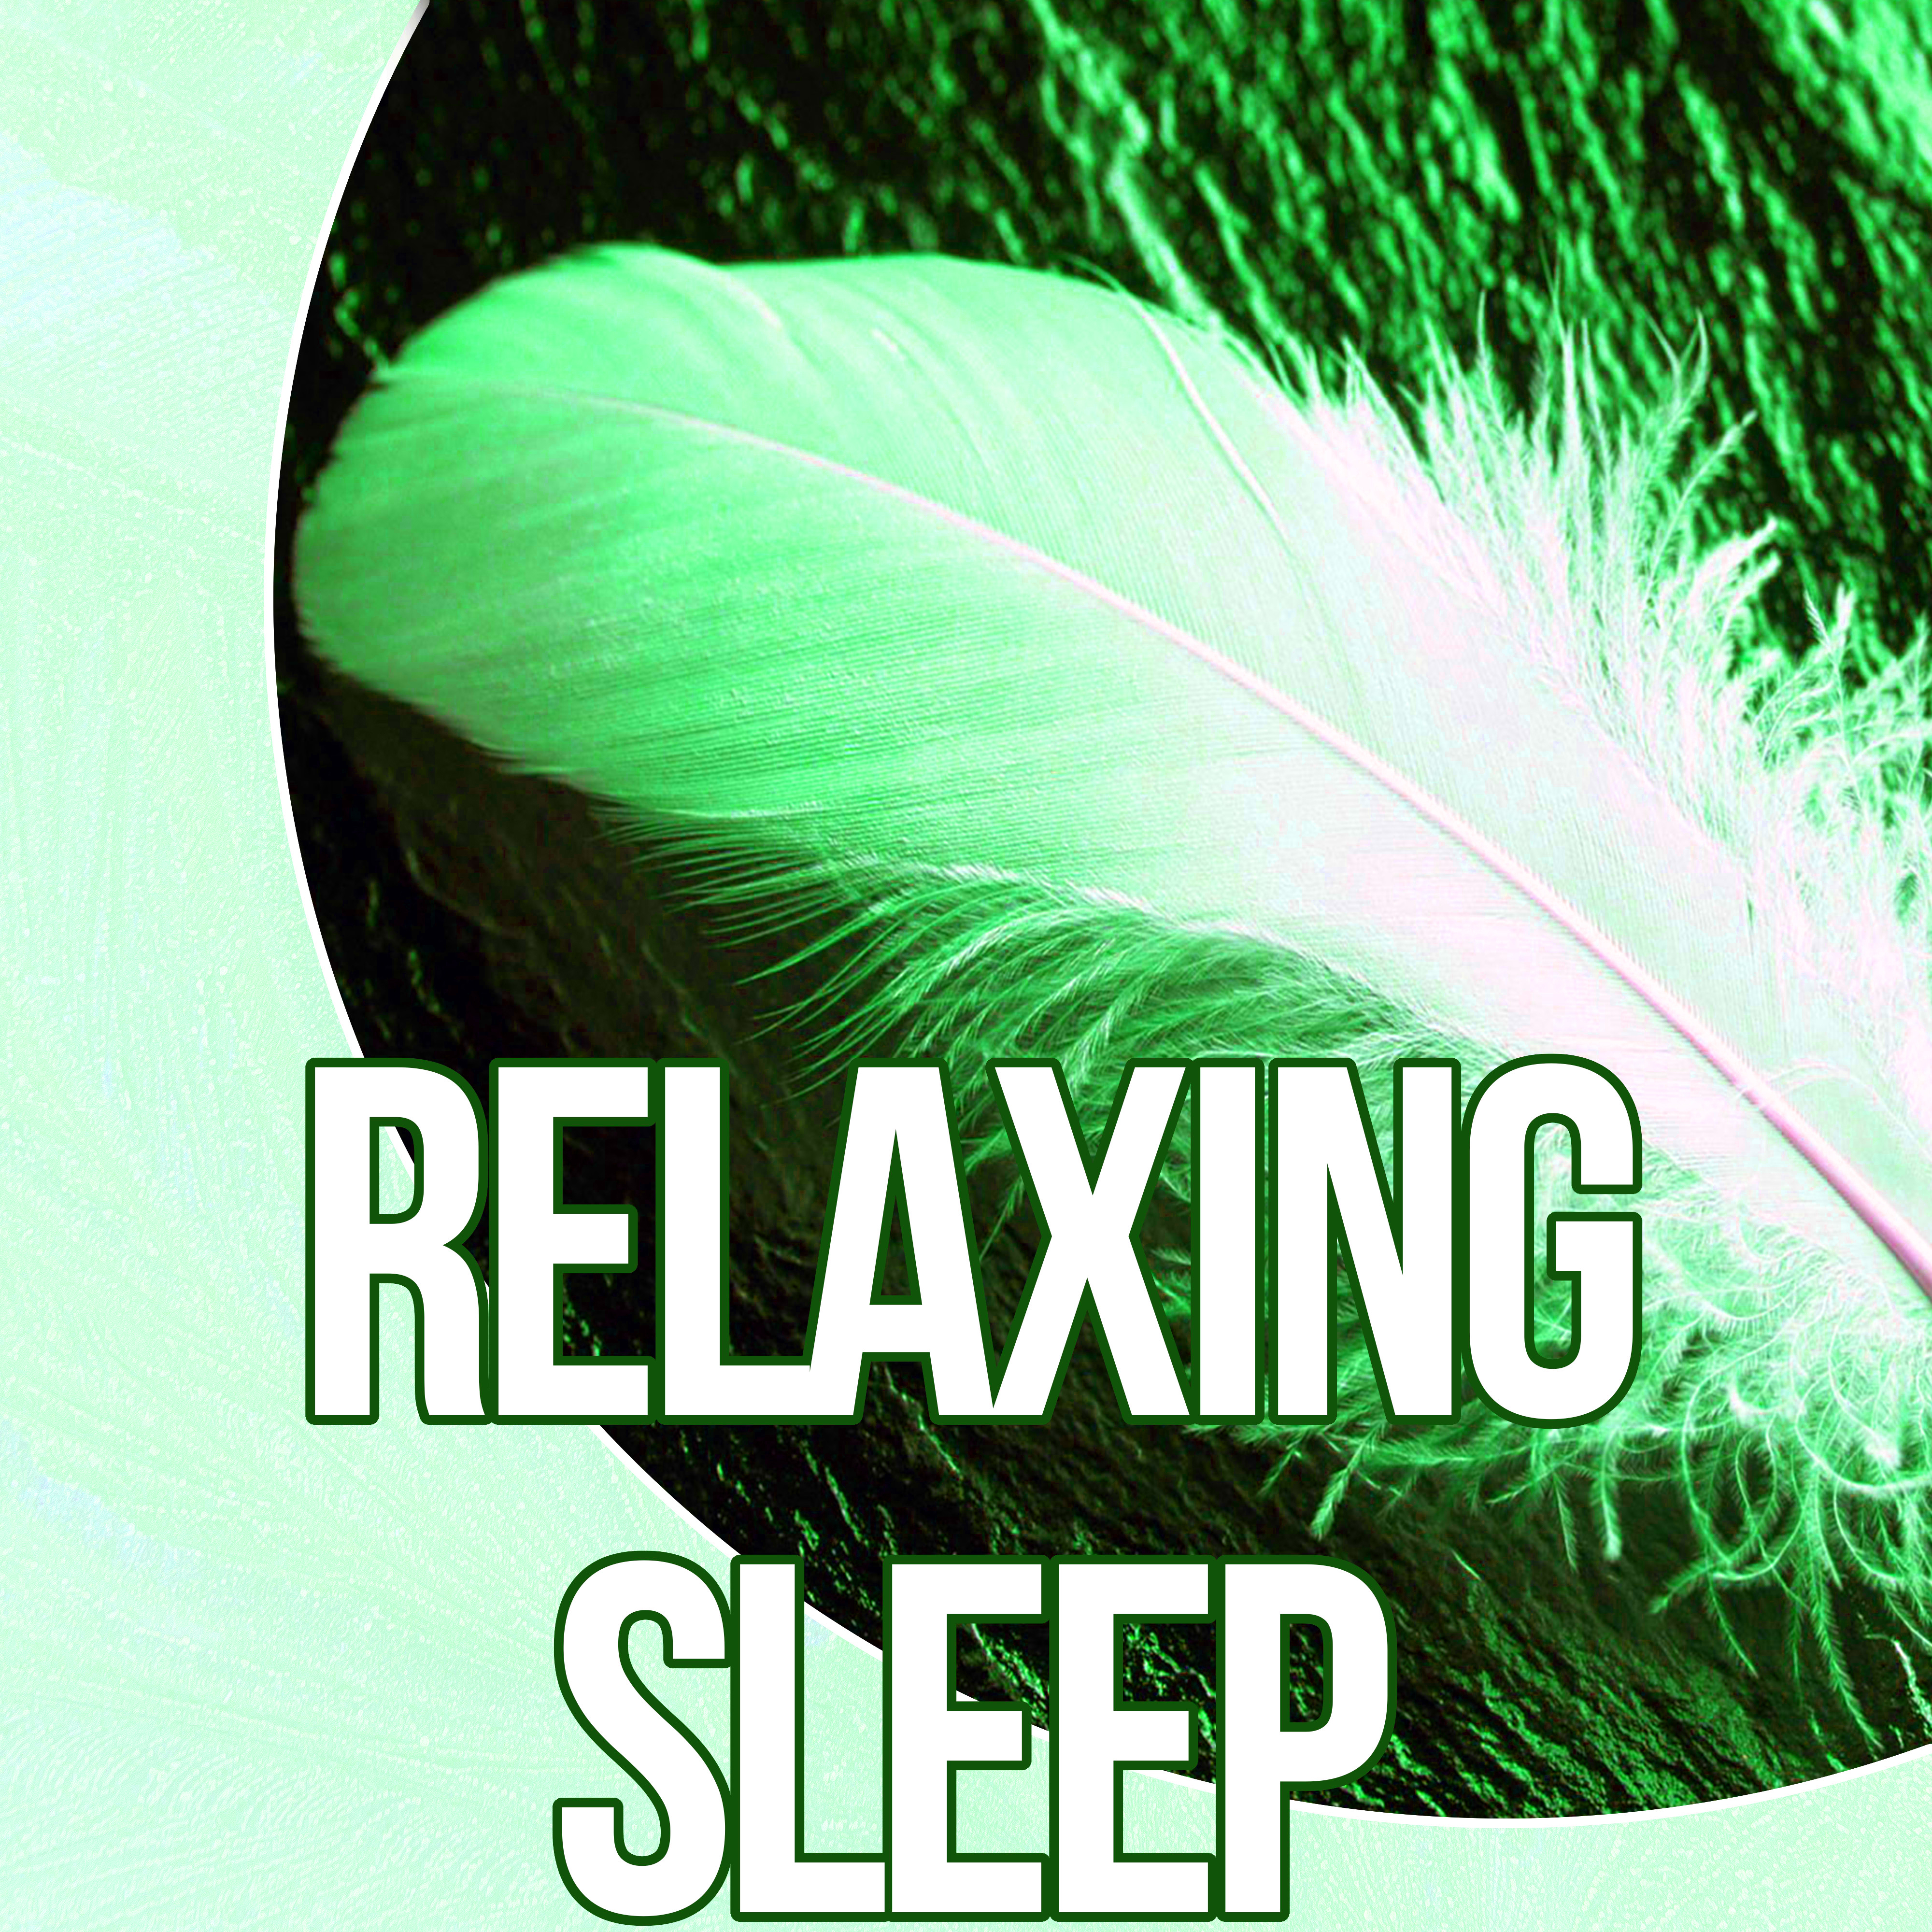 Relaxing Sleep - New Age, Relaxation Meditation, Serenity Lullabies, Insomnia Therapy, Good Night, Sleep Well